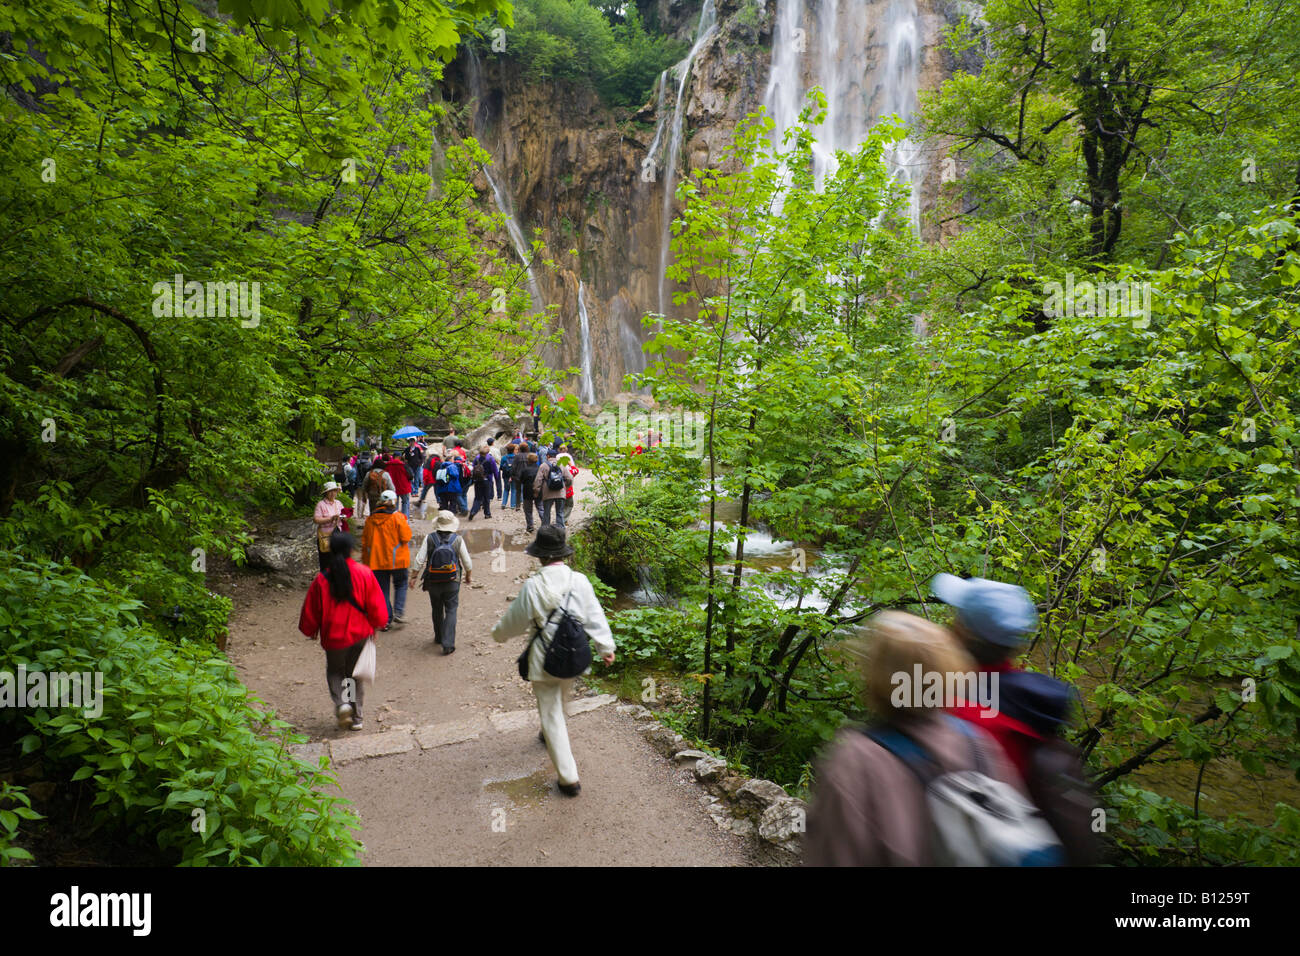 Big waterfall ('Veliki slap') famous sightseeing place with many visitors, Plitvice national park in Croatia, Lower lakes area Stock Photo